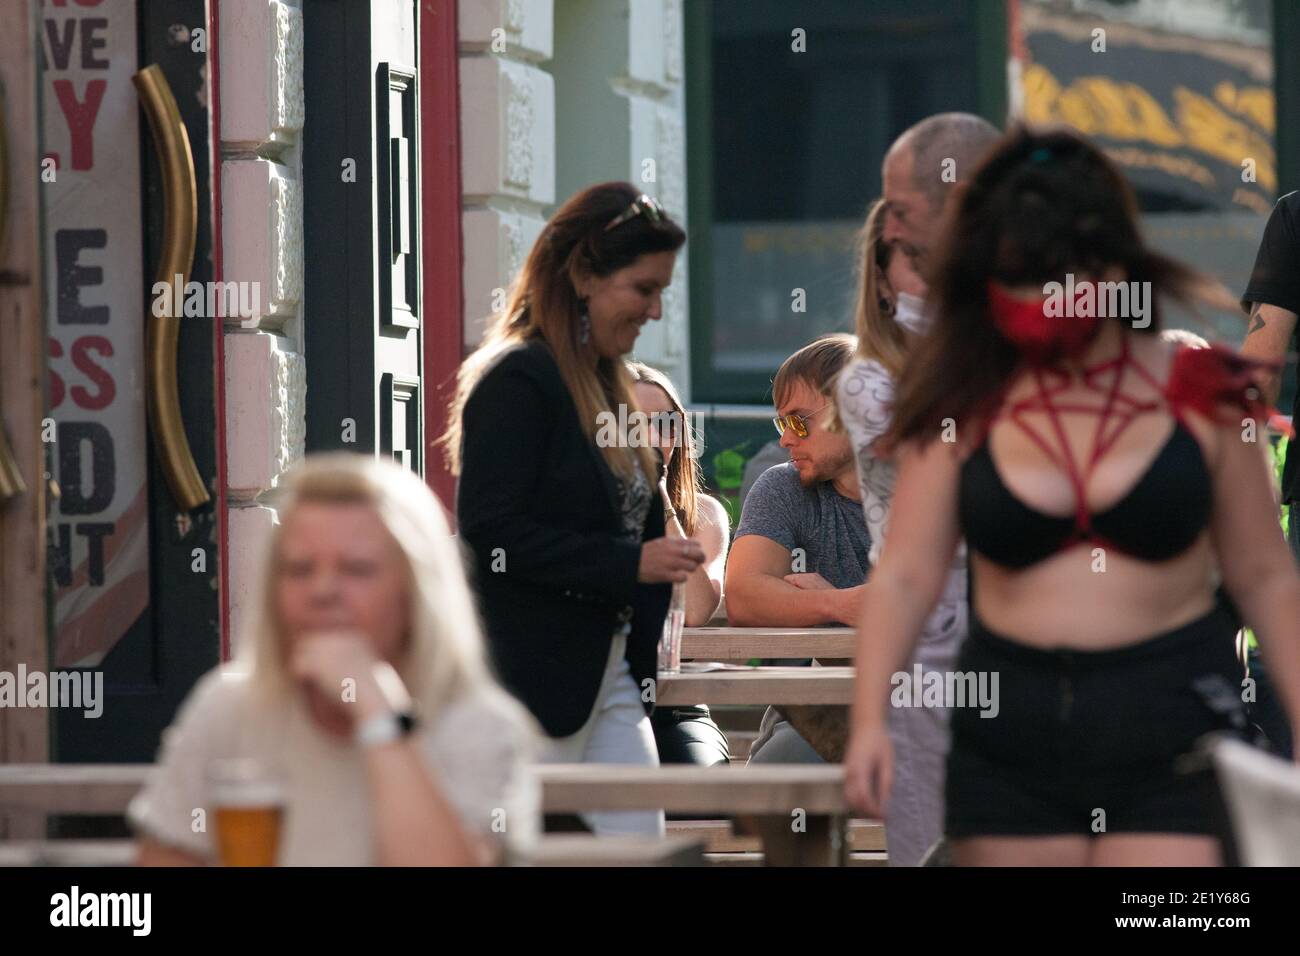 Liverpool, UK - September 19 2020: People in Liverpool enjoy a drink in the sun before local lockdown restrictions come into effect on Tuesday. Stock Photo